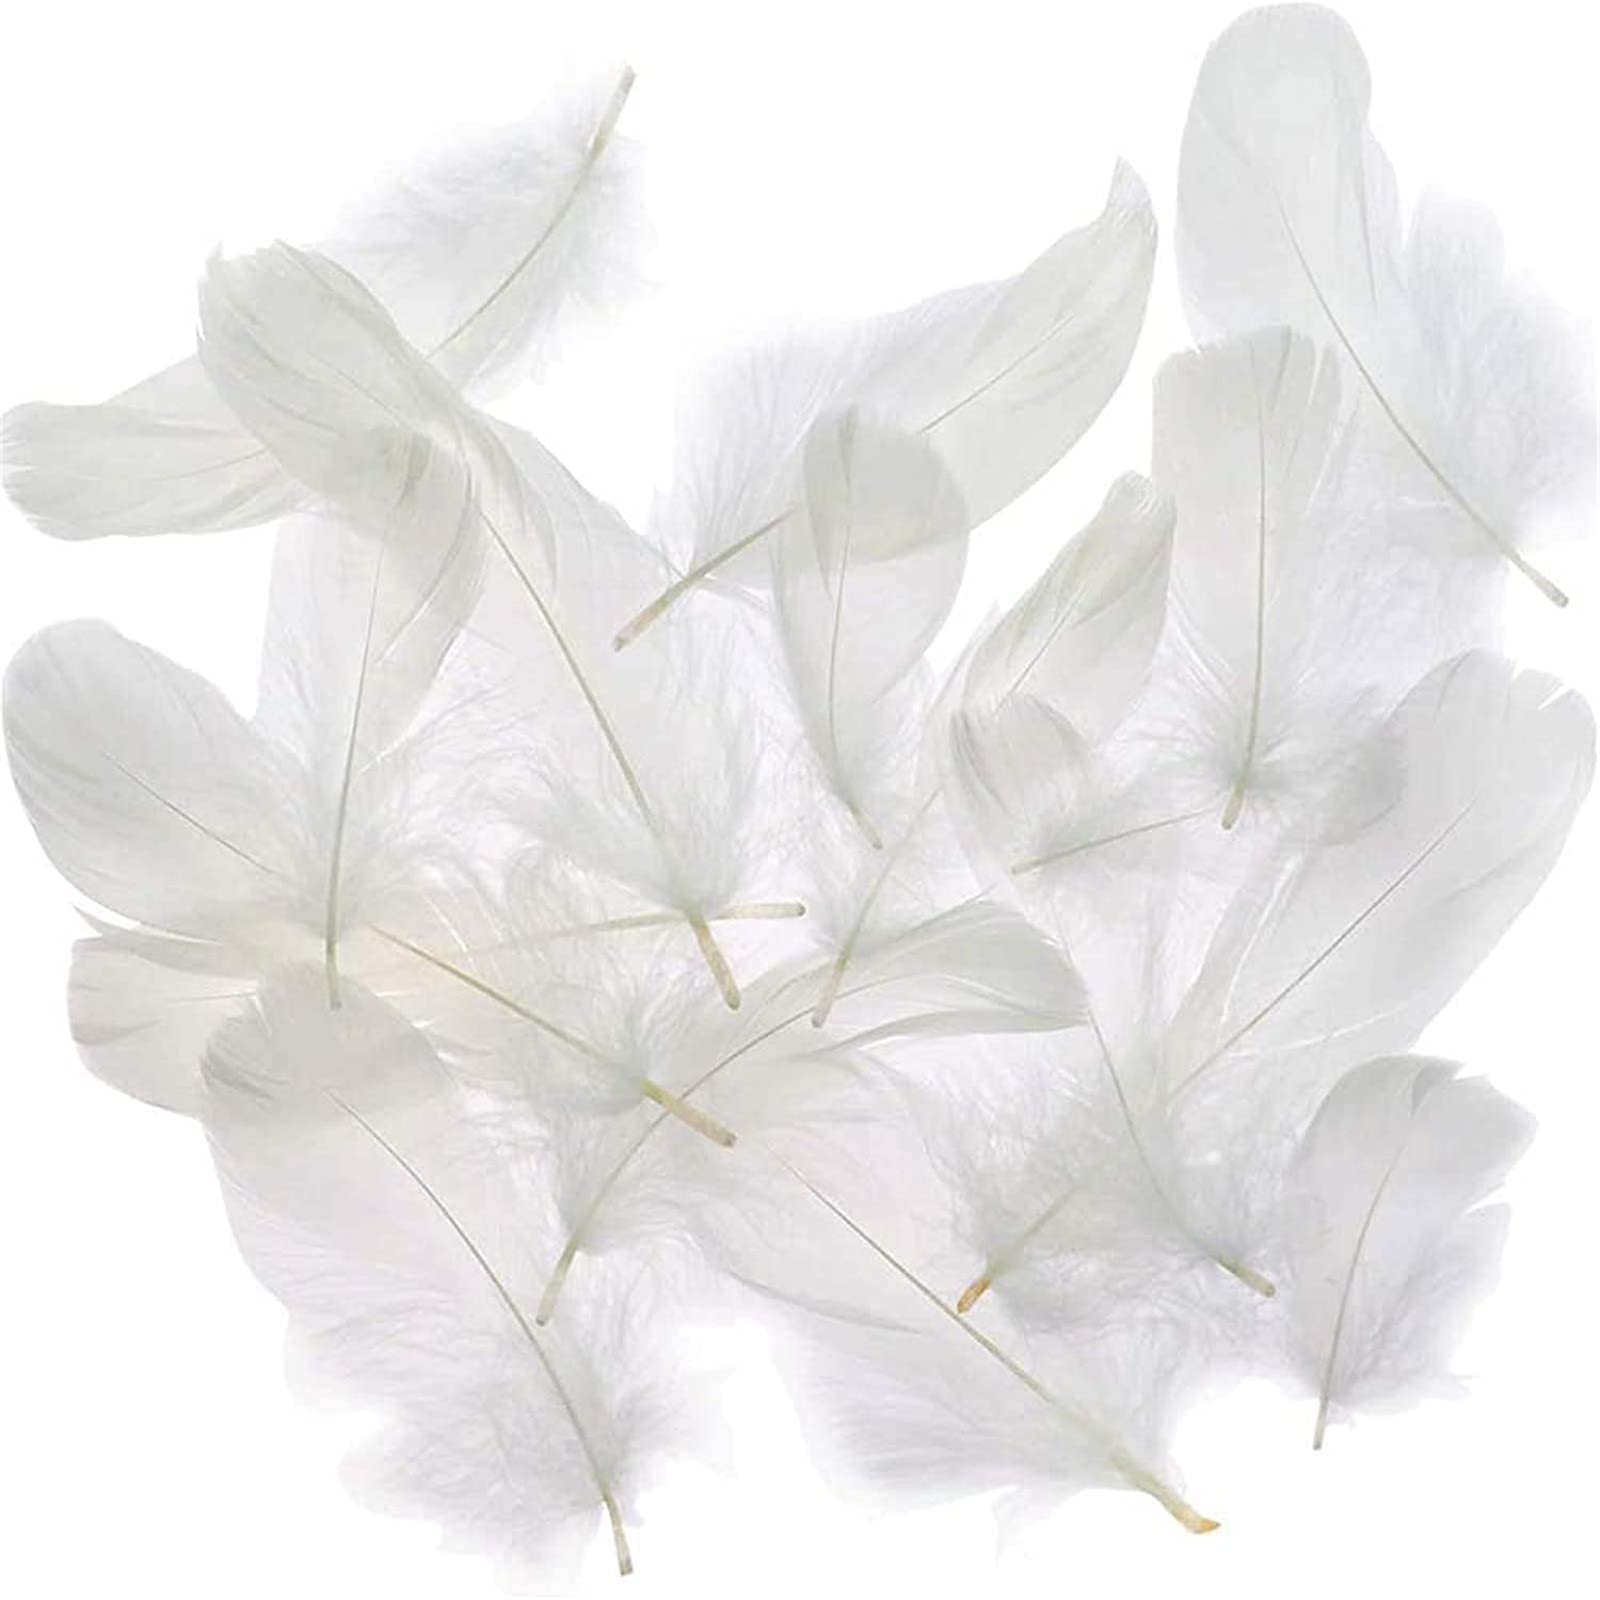 Coceca 500pcs 3-5 Inches White Feathers for DIY Craft Wedding Home